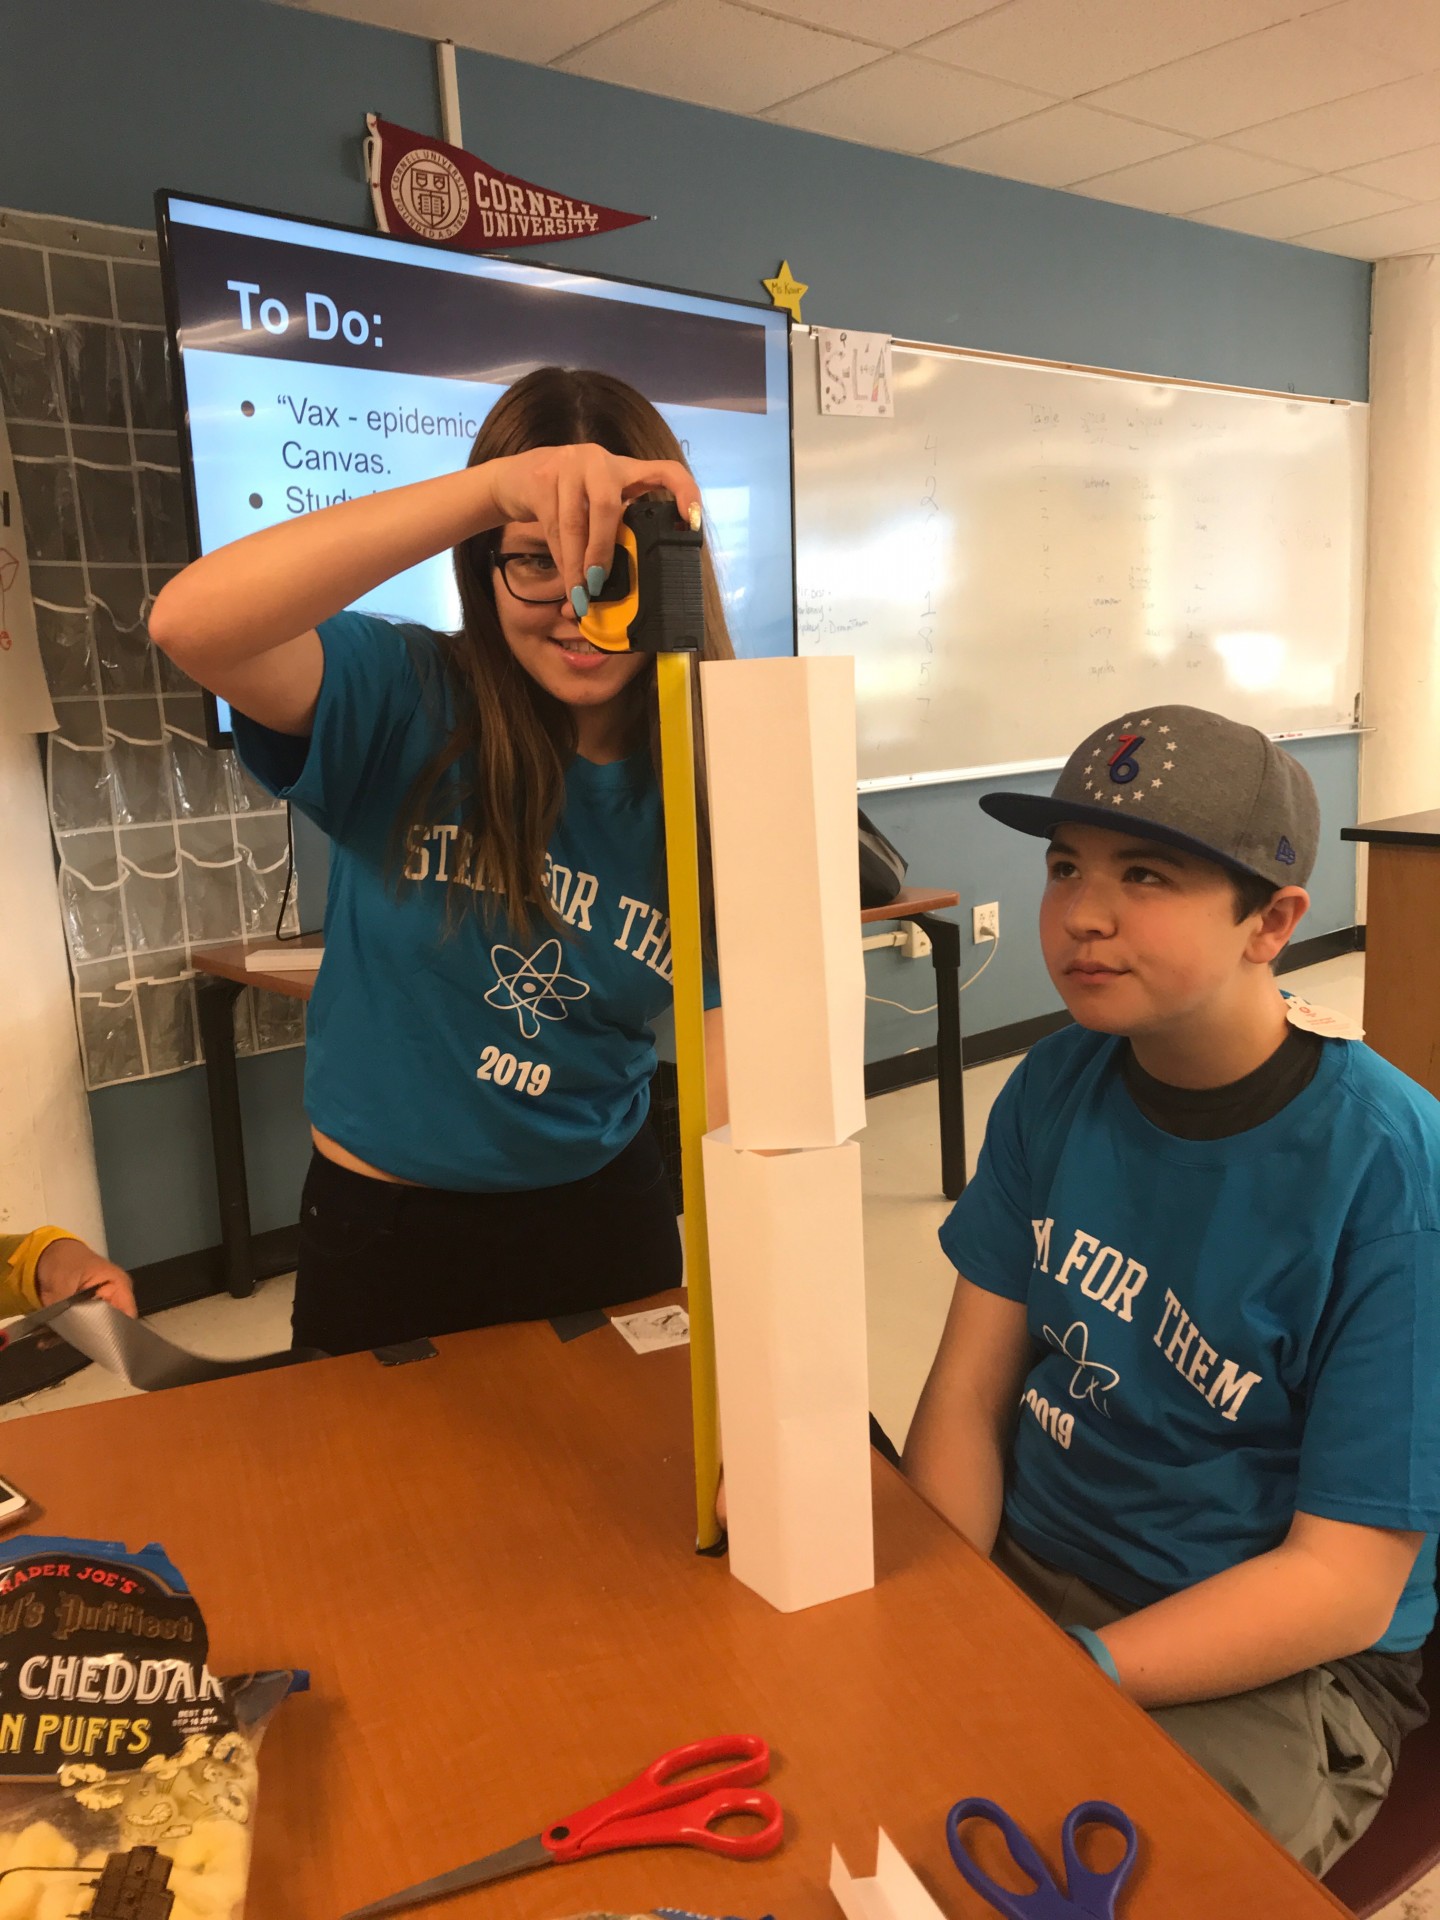 Measuring the length of Max's paper tower after completing the NCOTI inspired activity.